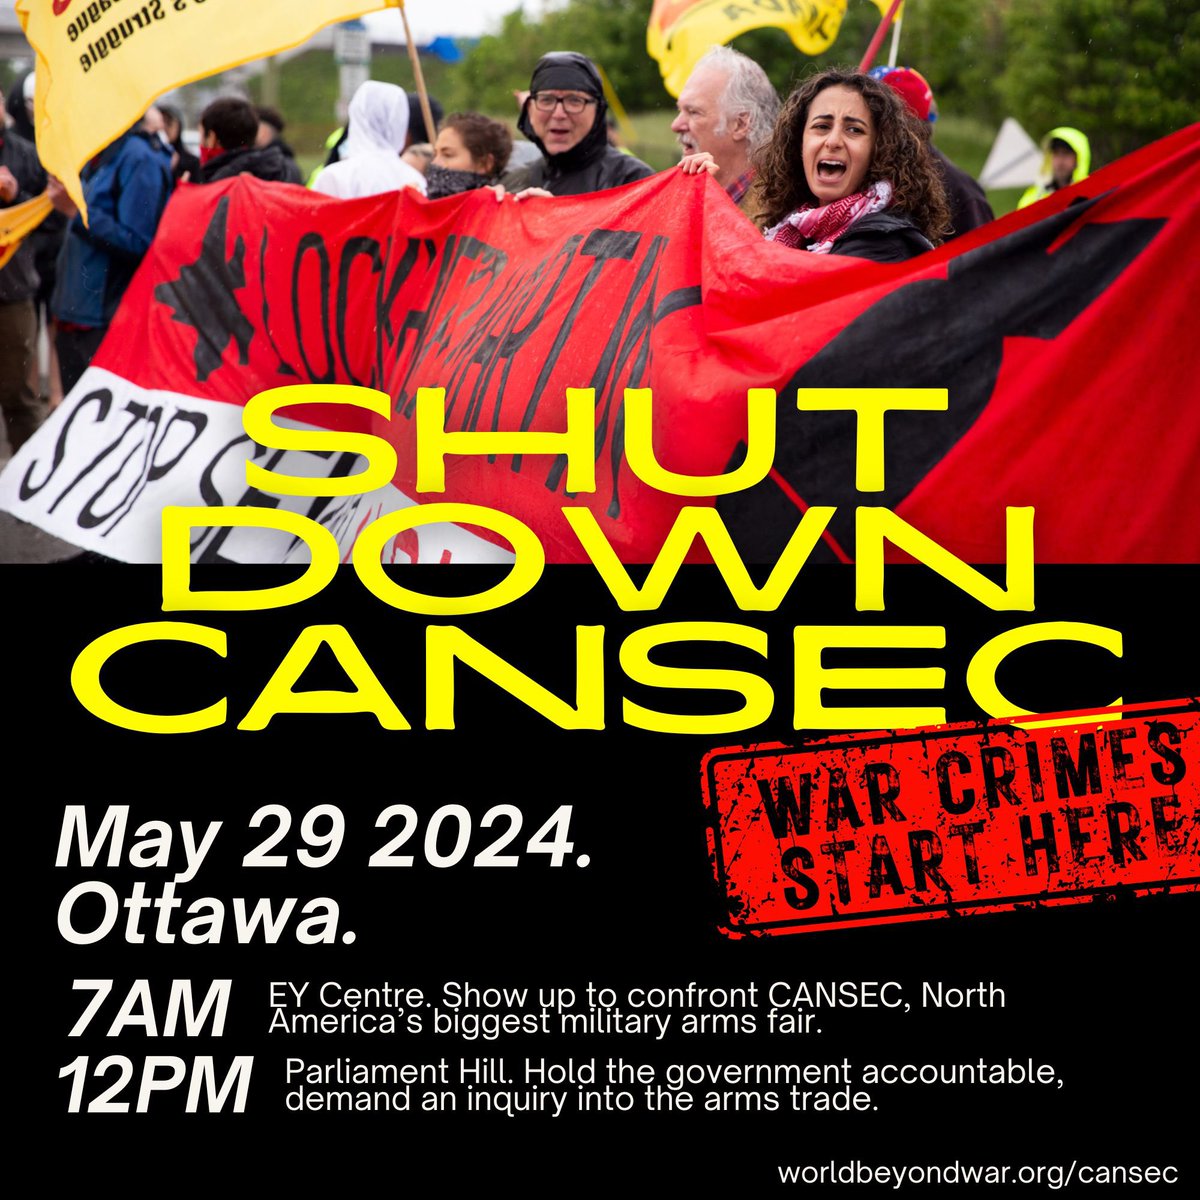 North America’s biggest military and weapons show starts on May 29. This is our chance to confront govt, military, and weapons reps from Israel, Canada, and around the world — the people profiting most from genocide and bloodshed. #ShutDownCANSEC Info: worldbeyondwar.org/cansec